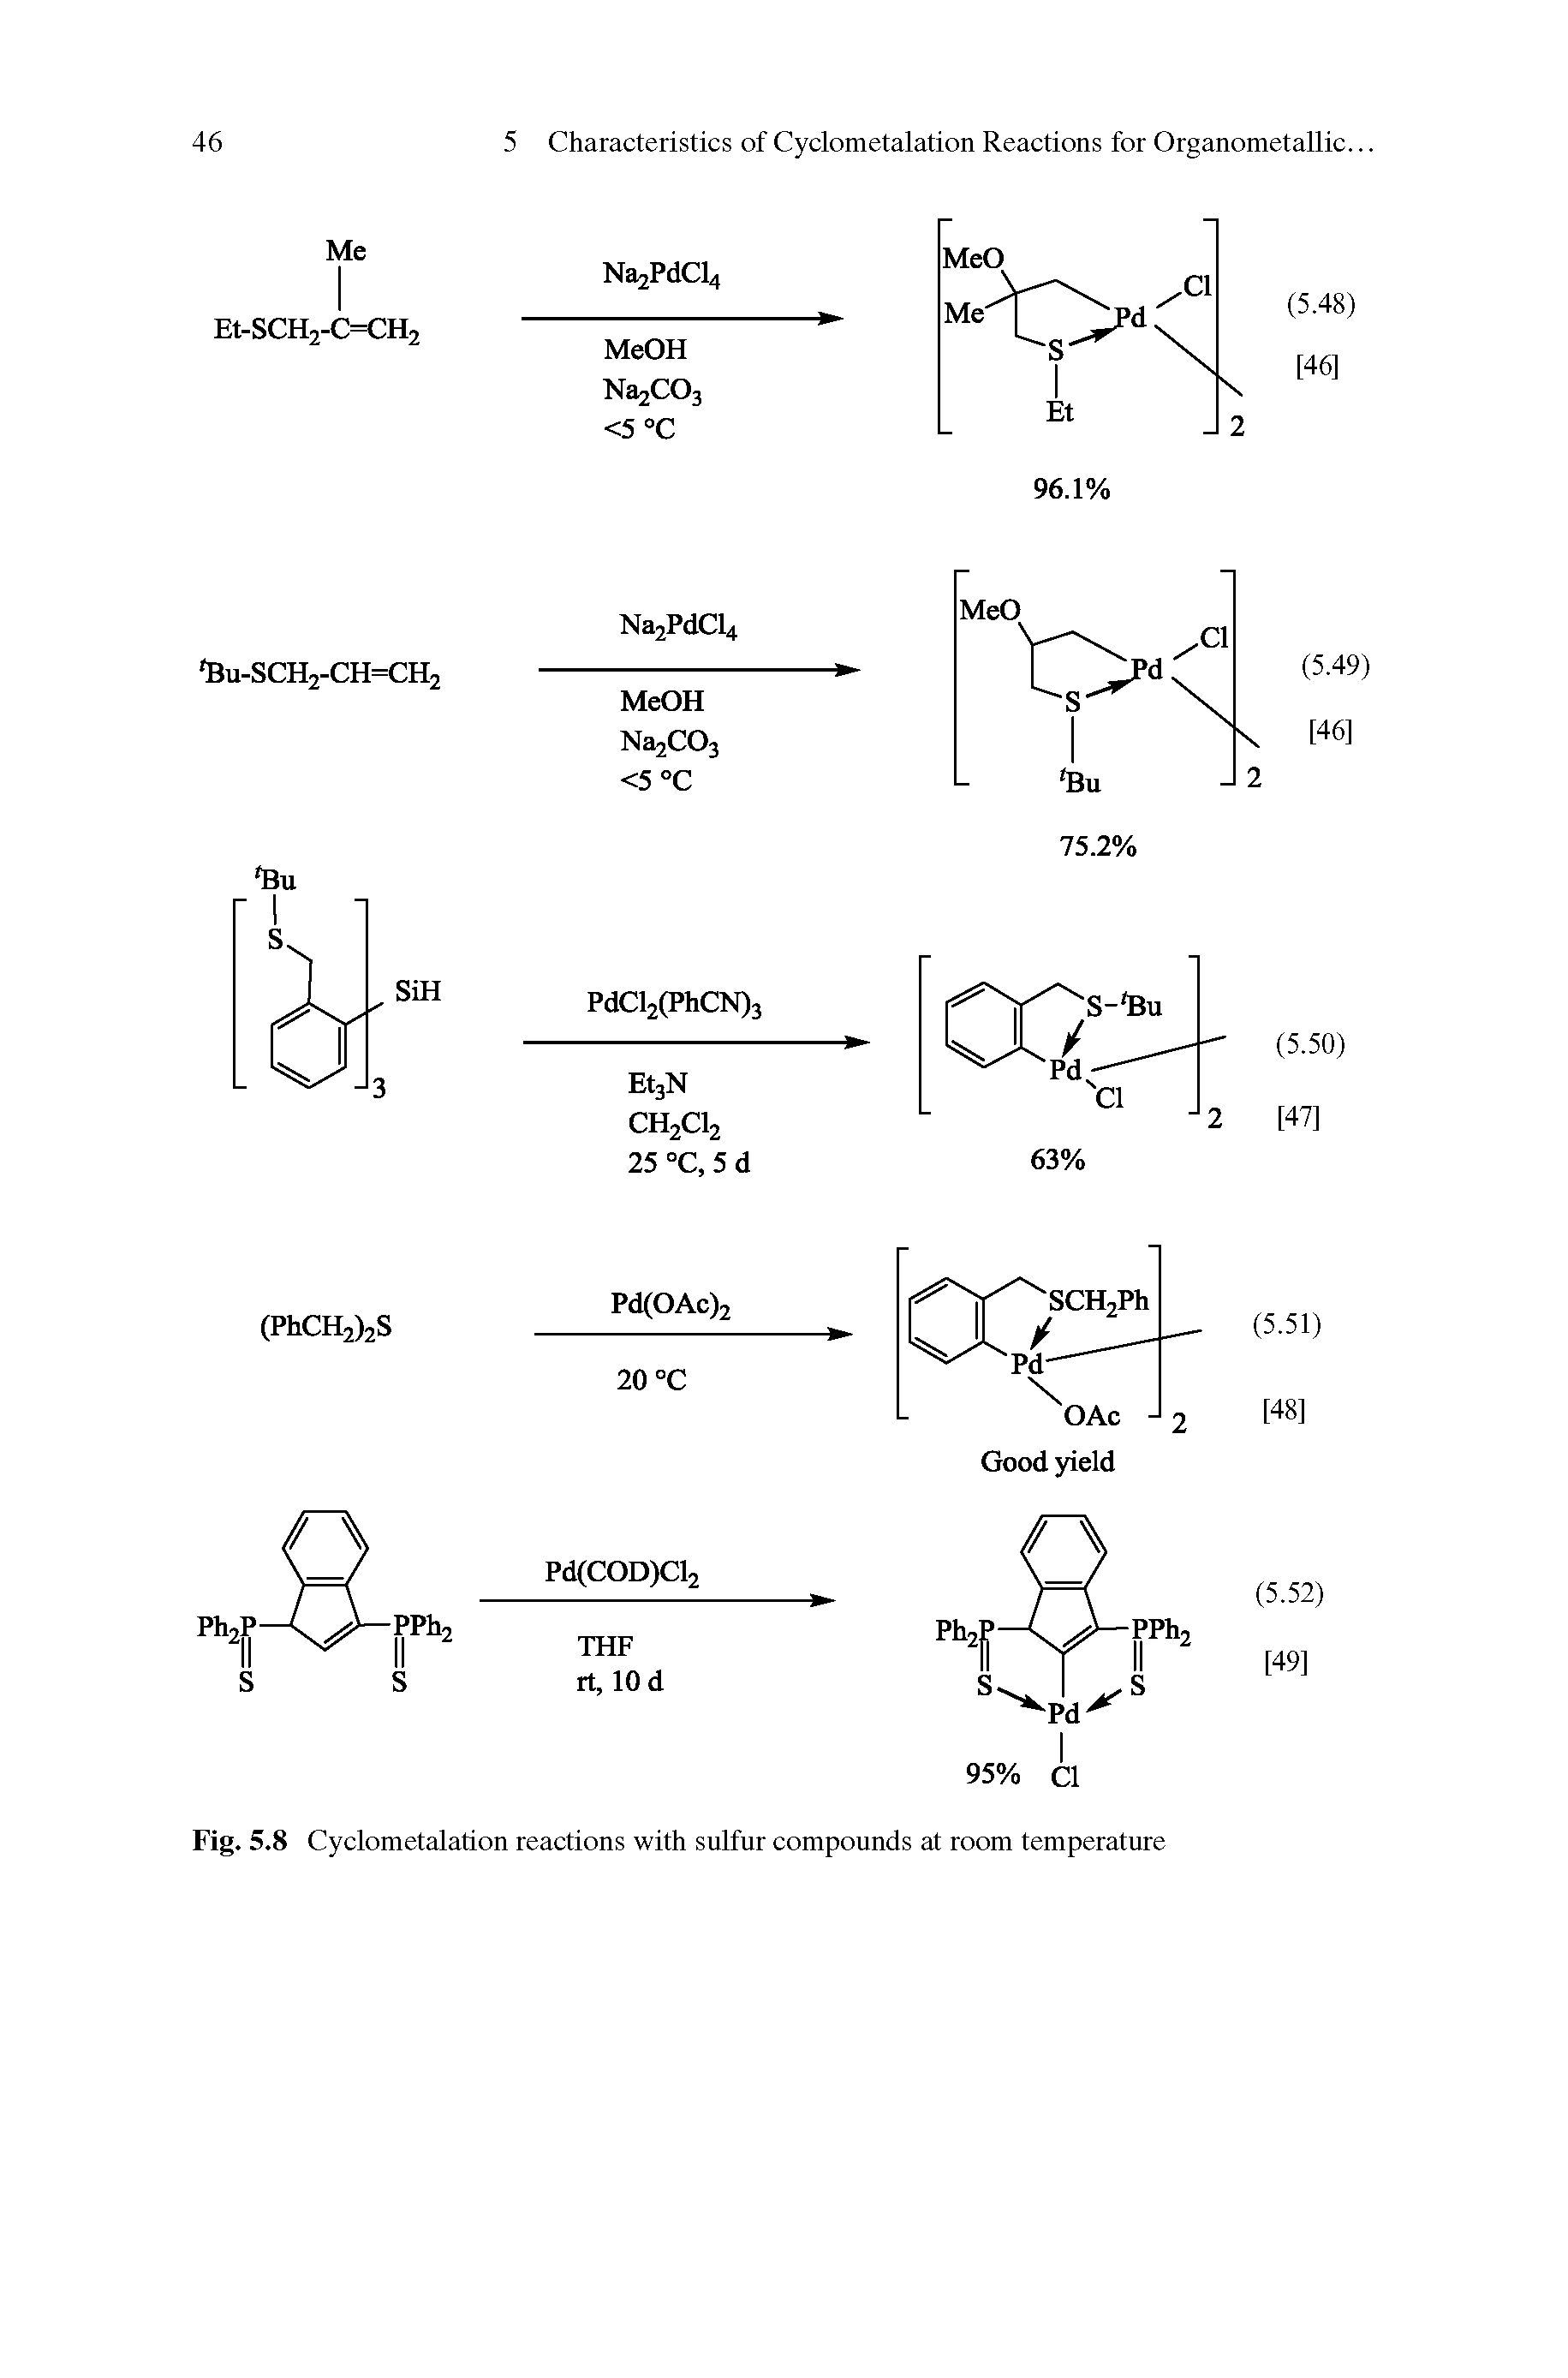 Fig. 5.8 Cyclometalation reactions with sulfur compounds at room temperature...